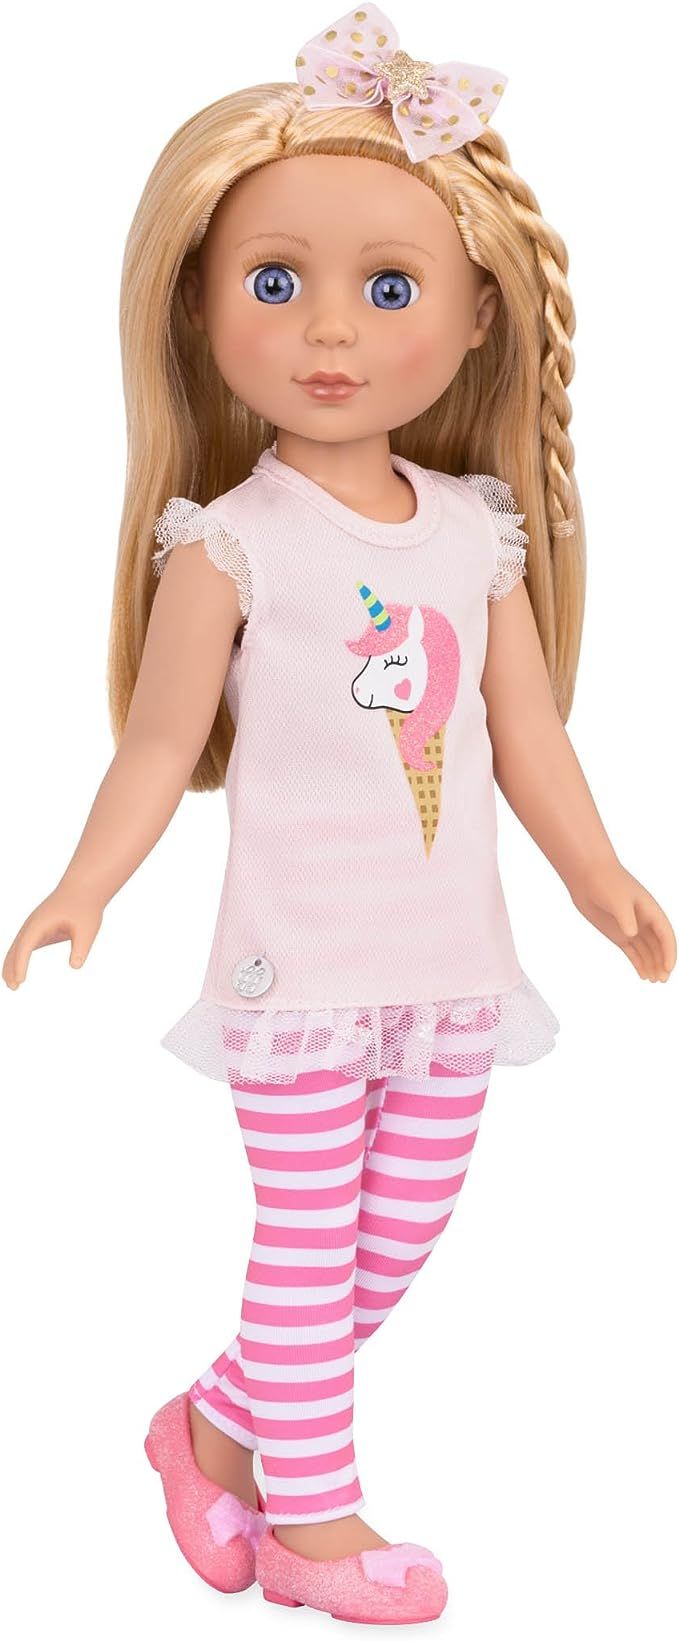 Glitter Girls Doll by Battat - Lacy 14" Poseable Fashion Doll - Dolls for Girls Age 3 and Up | Amazon (US)